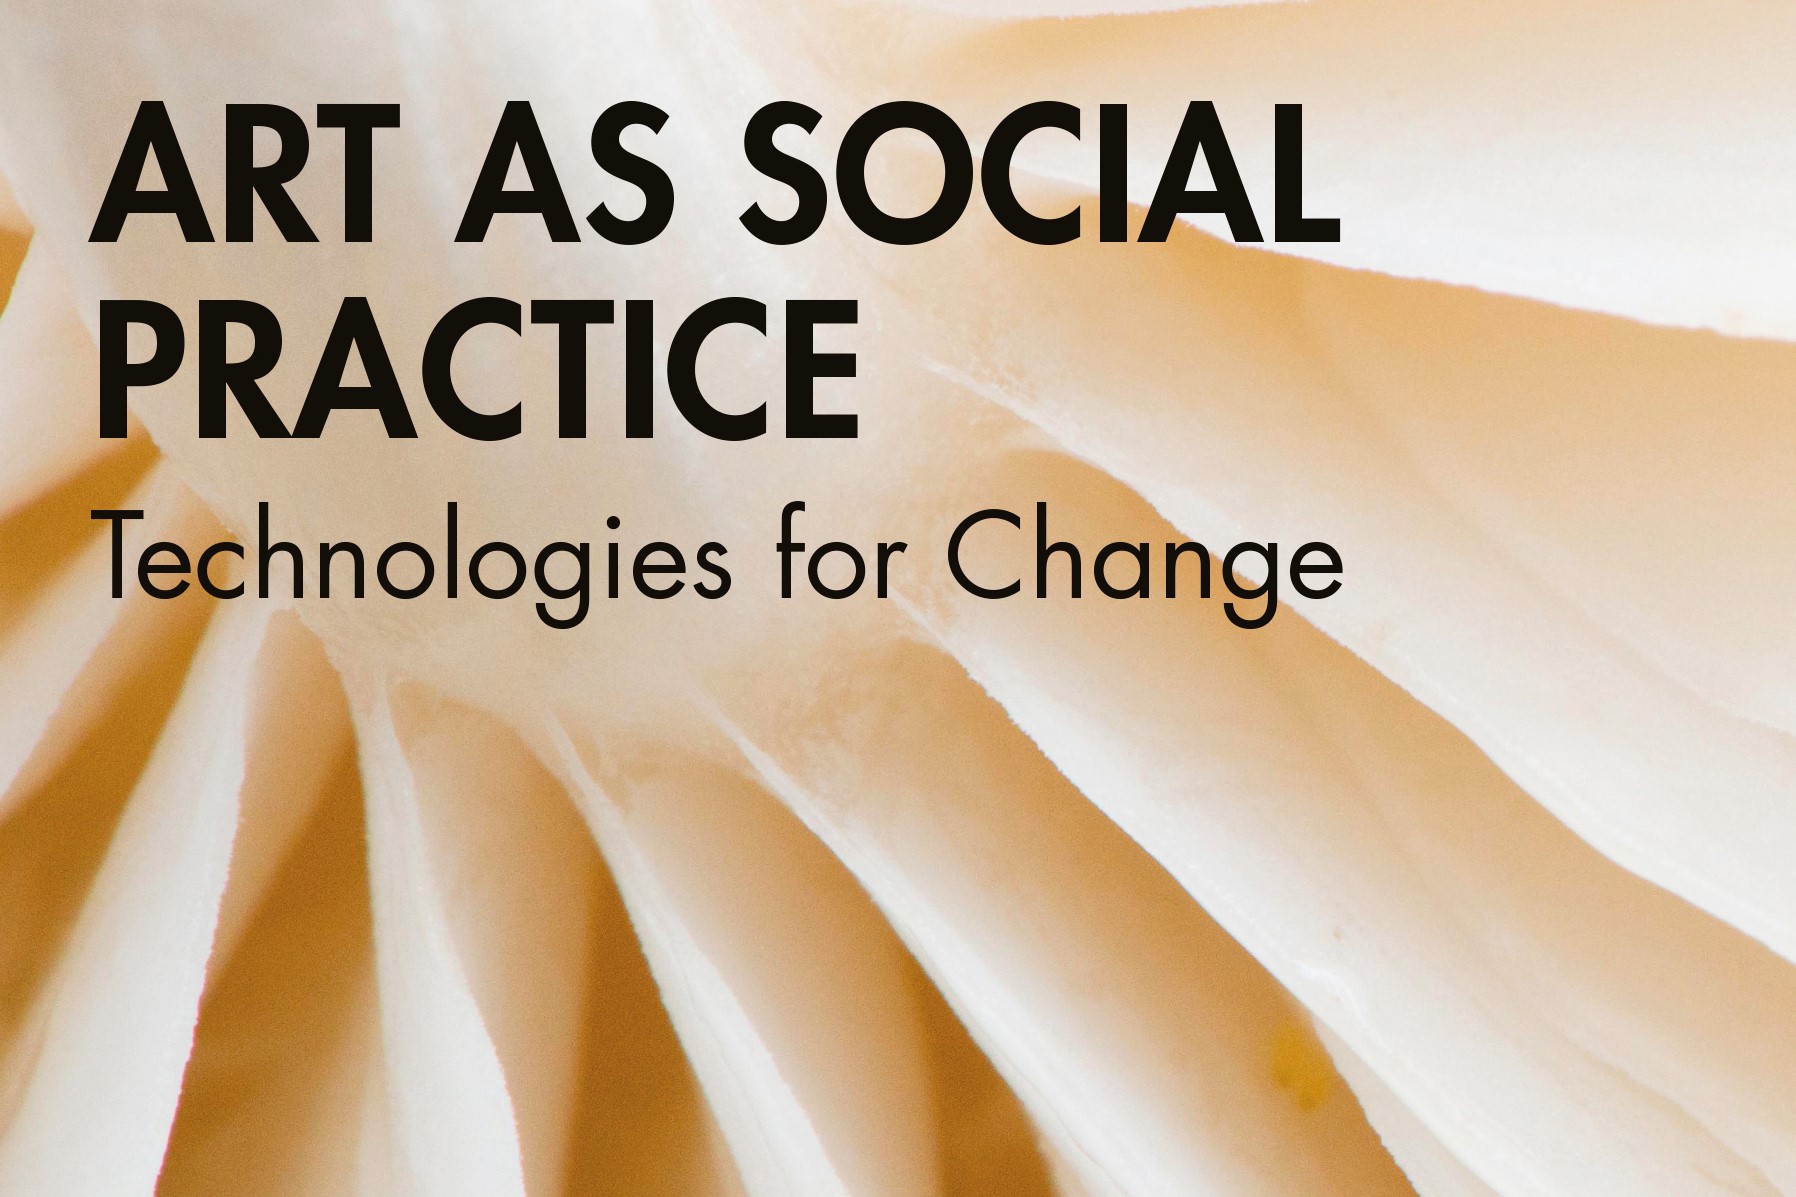 Art as Social Practice: Technologies for Change Book Talk and Signing